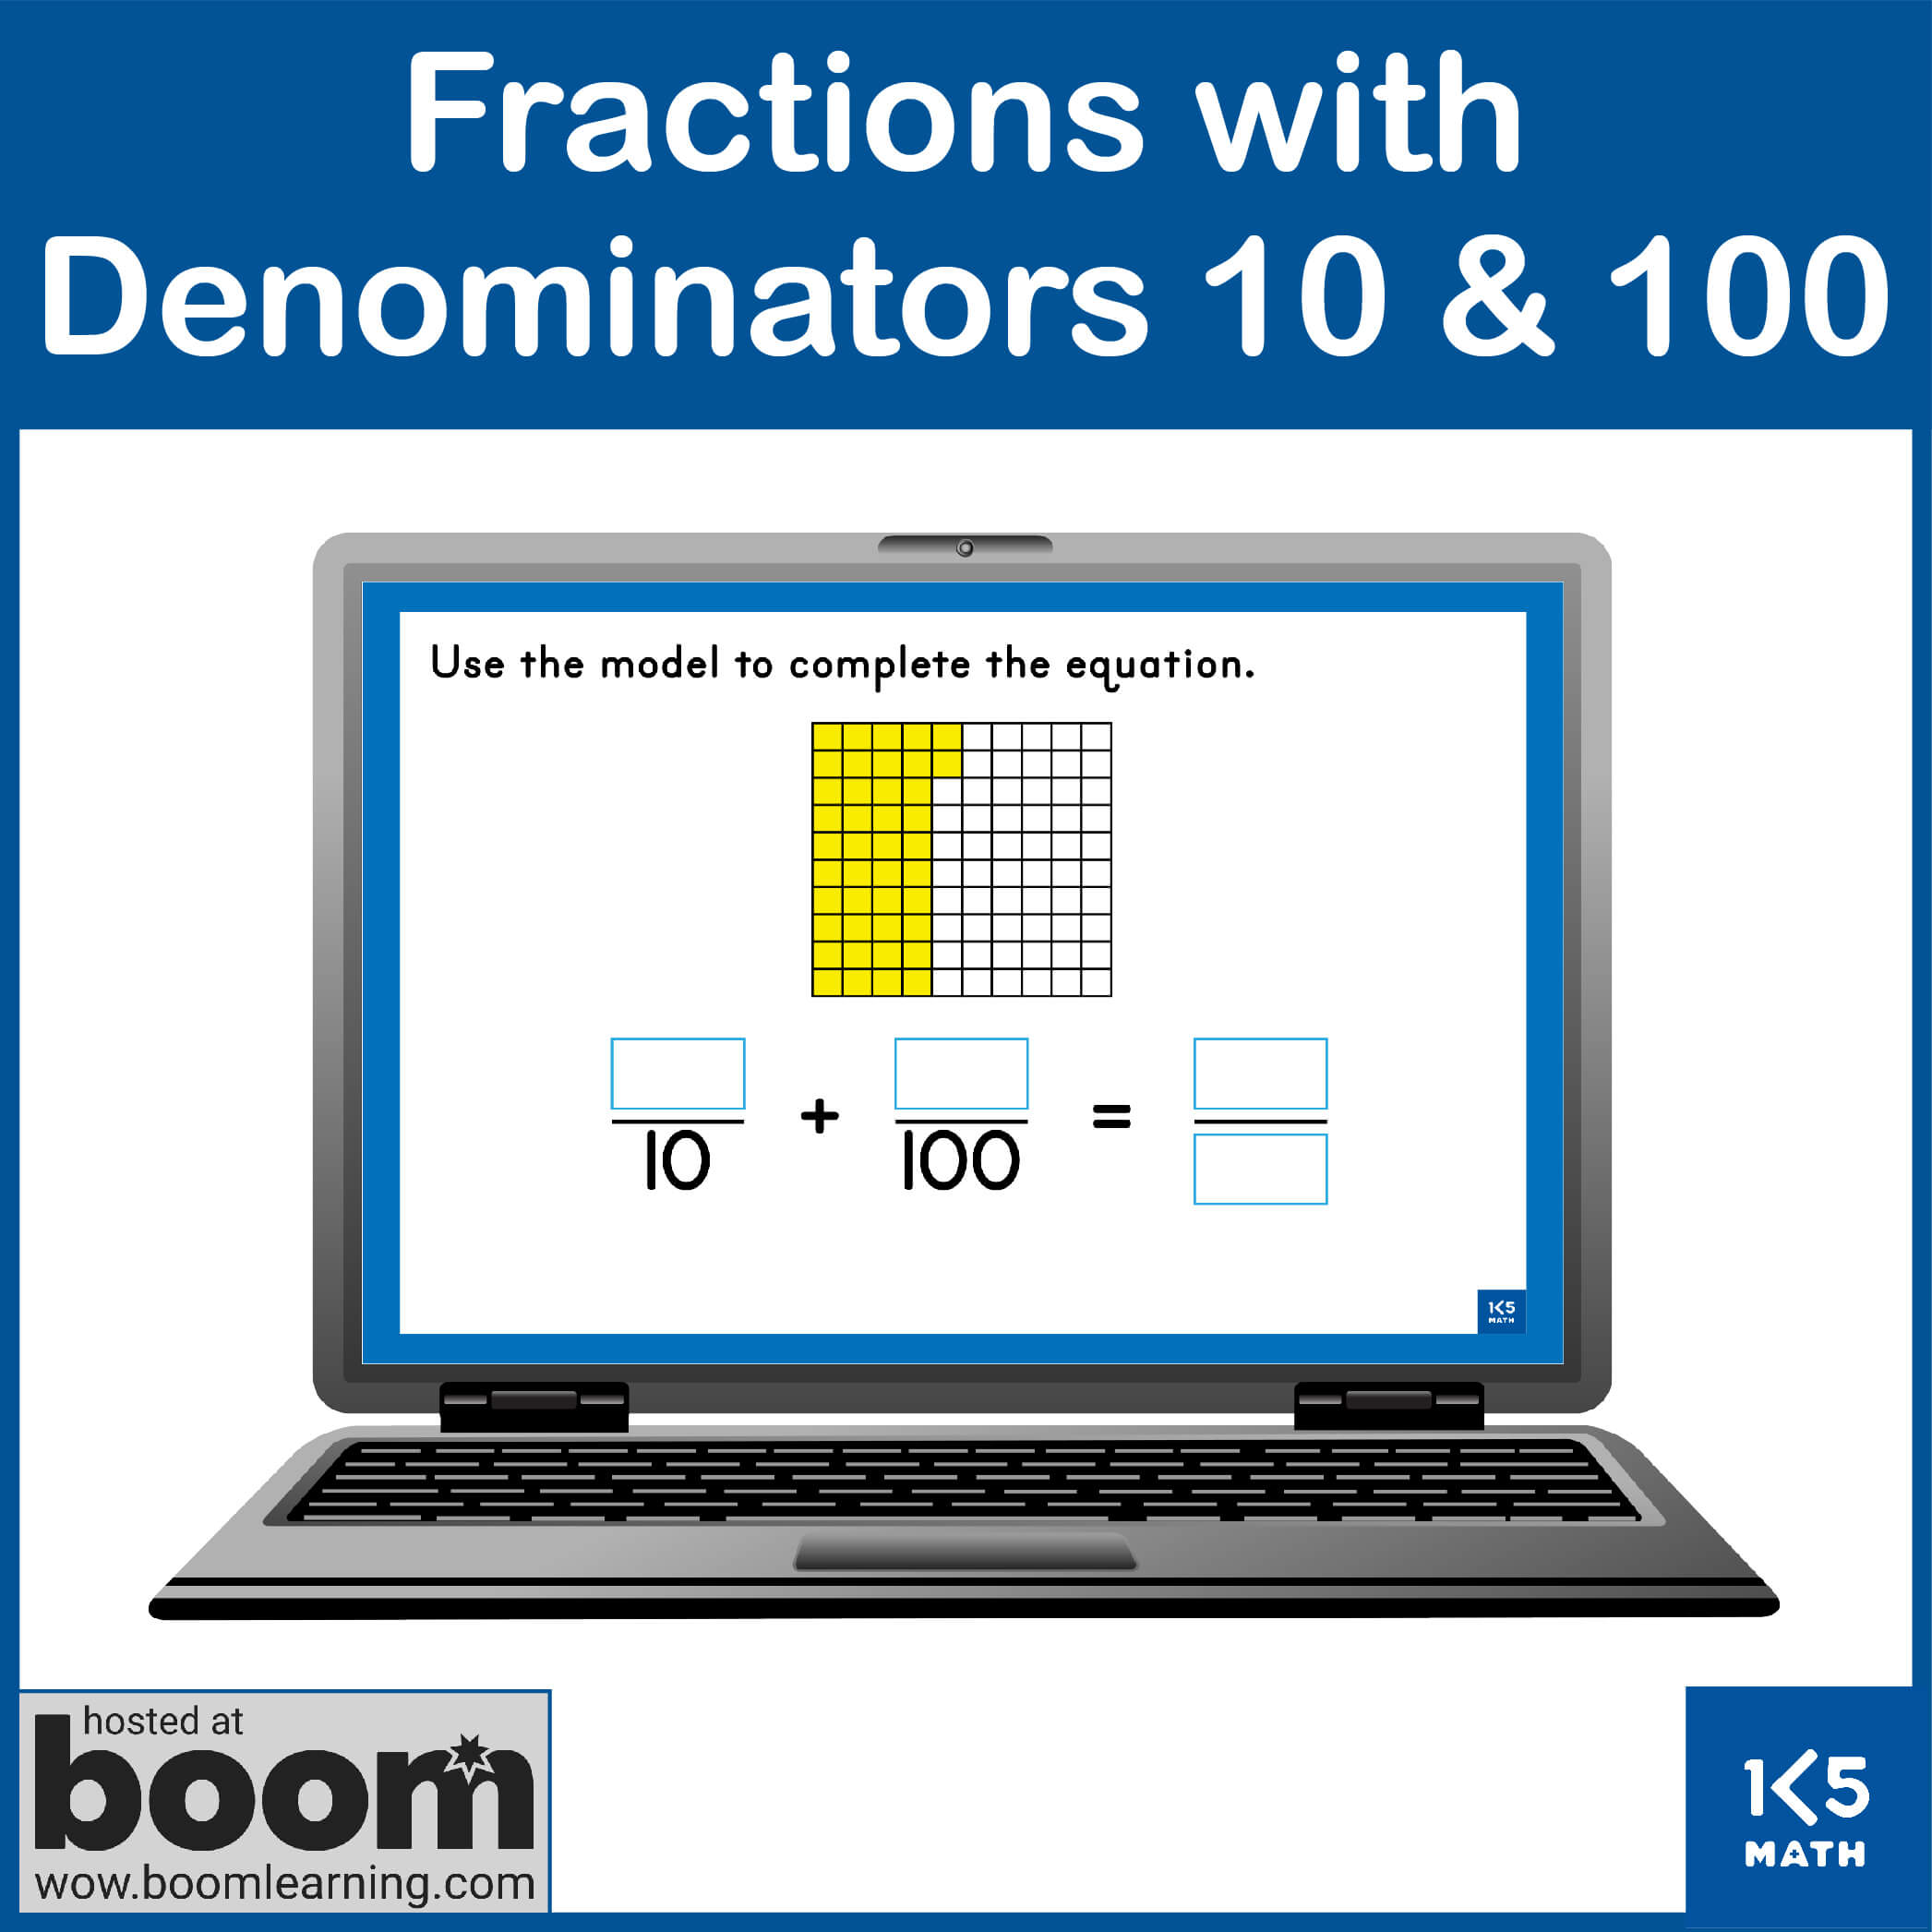 Boom Cards: Fractions with Denominators 10 and 100